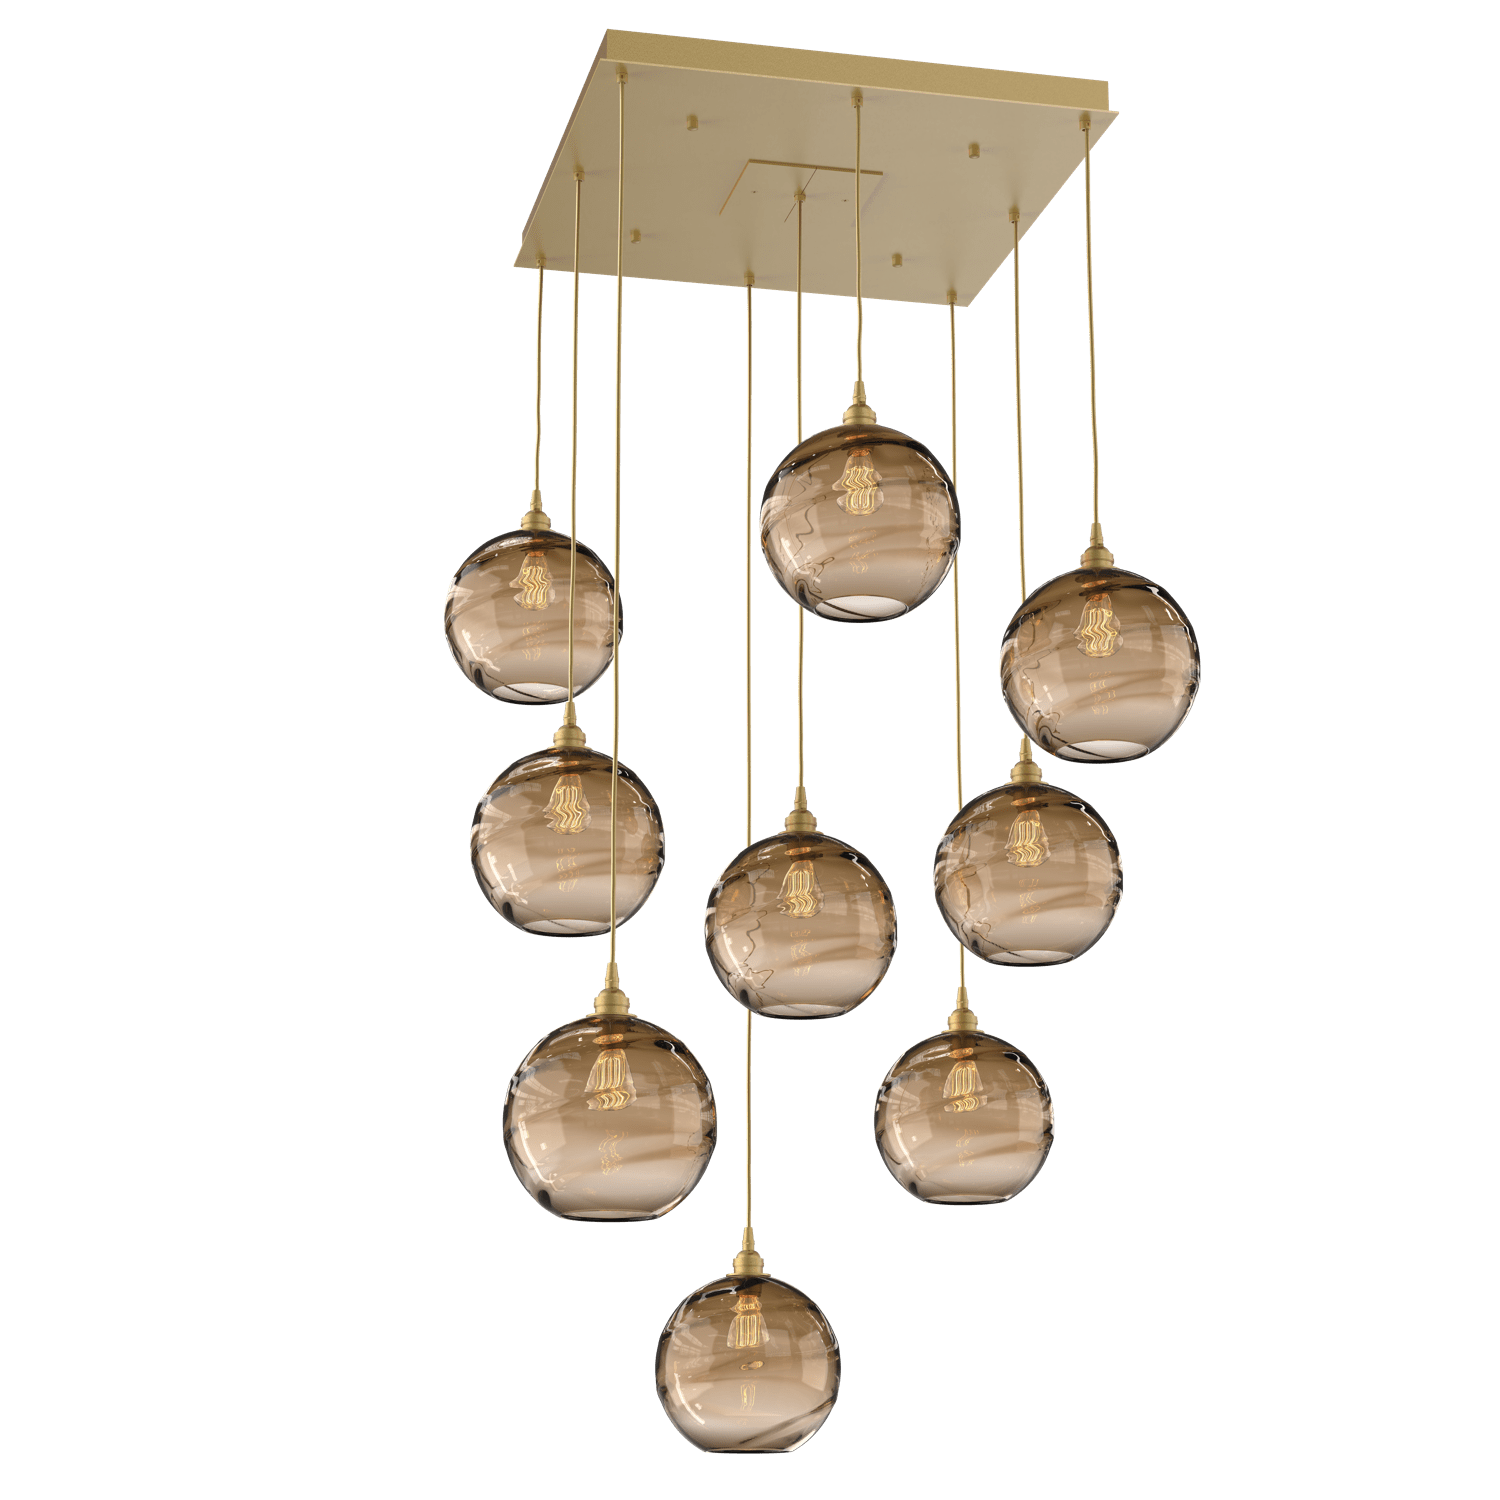 CHB0047-09-GB-OB-Hammerton-Studio-Optic-Blown-Glass-Terra-9-light-square-pendant-chandelier-with-gilded-brass-finish-and-optic-bronze-blown-glass-shades-and-incandescent-lamping